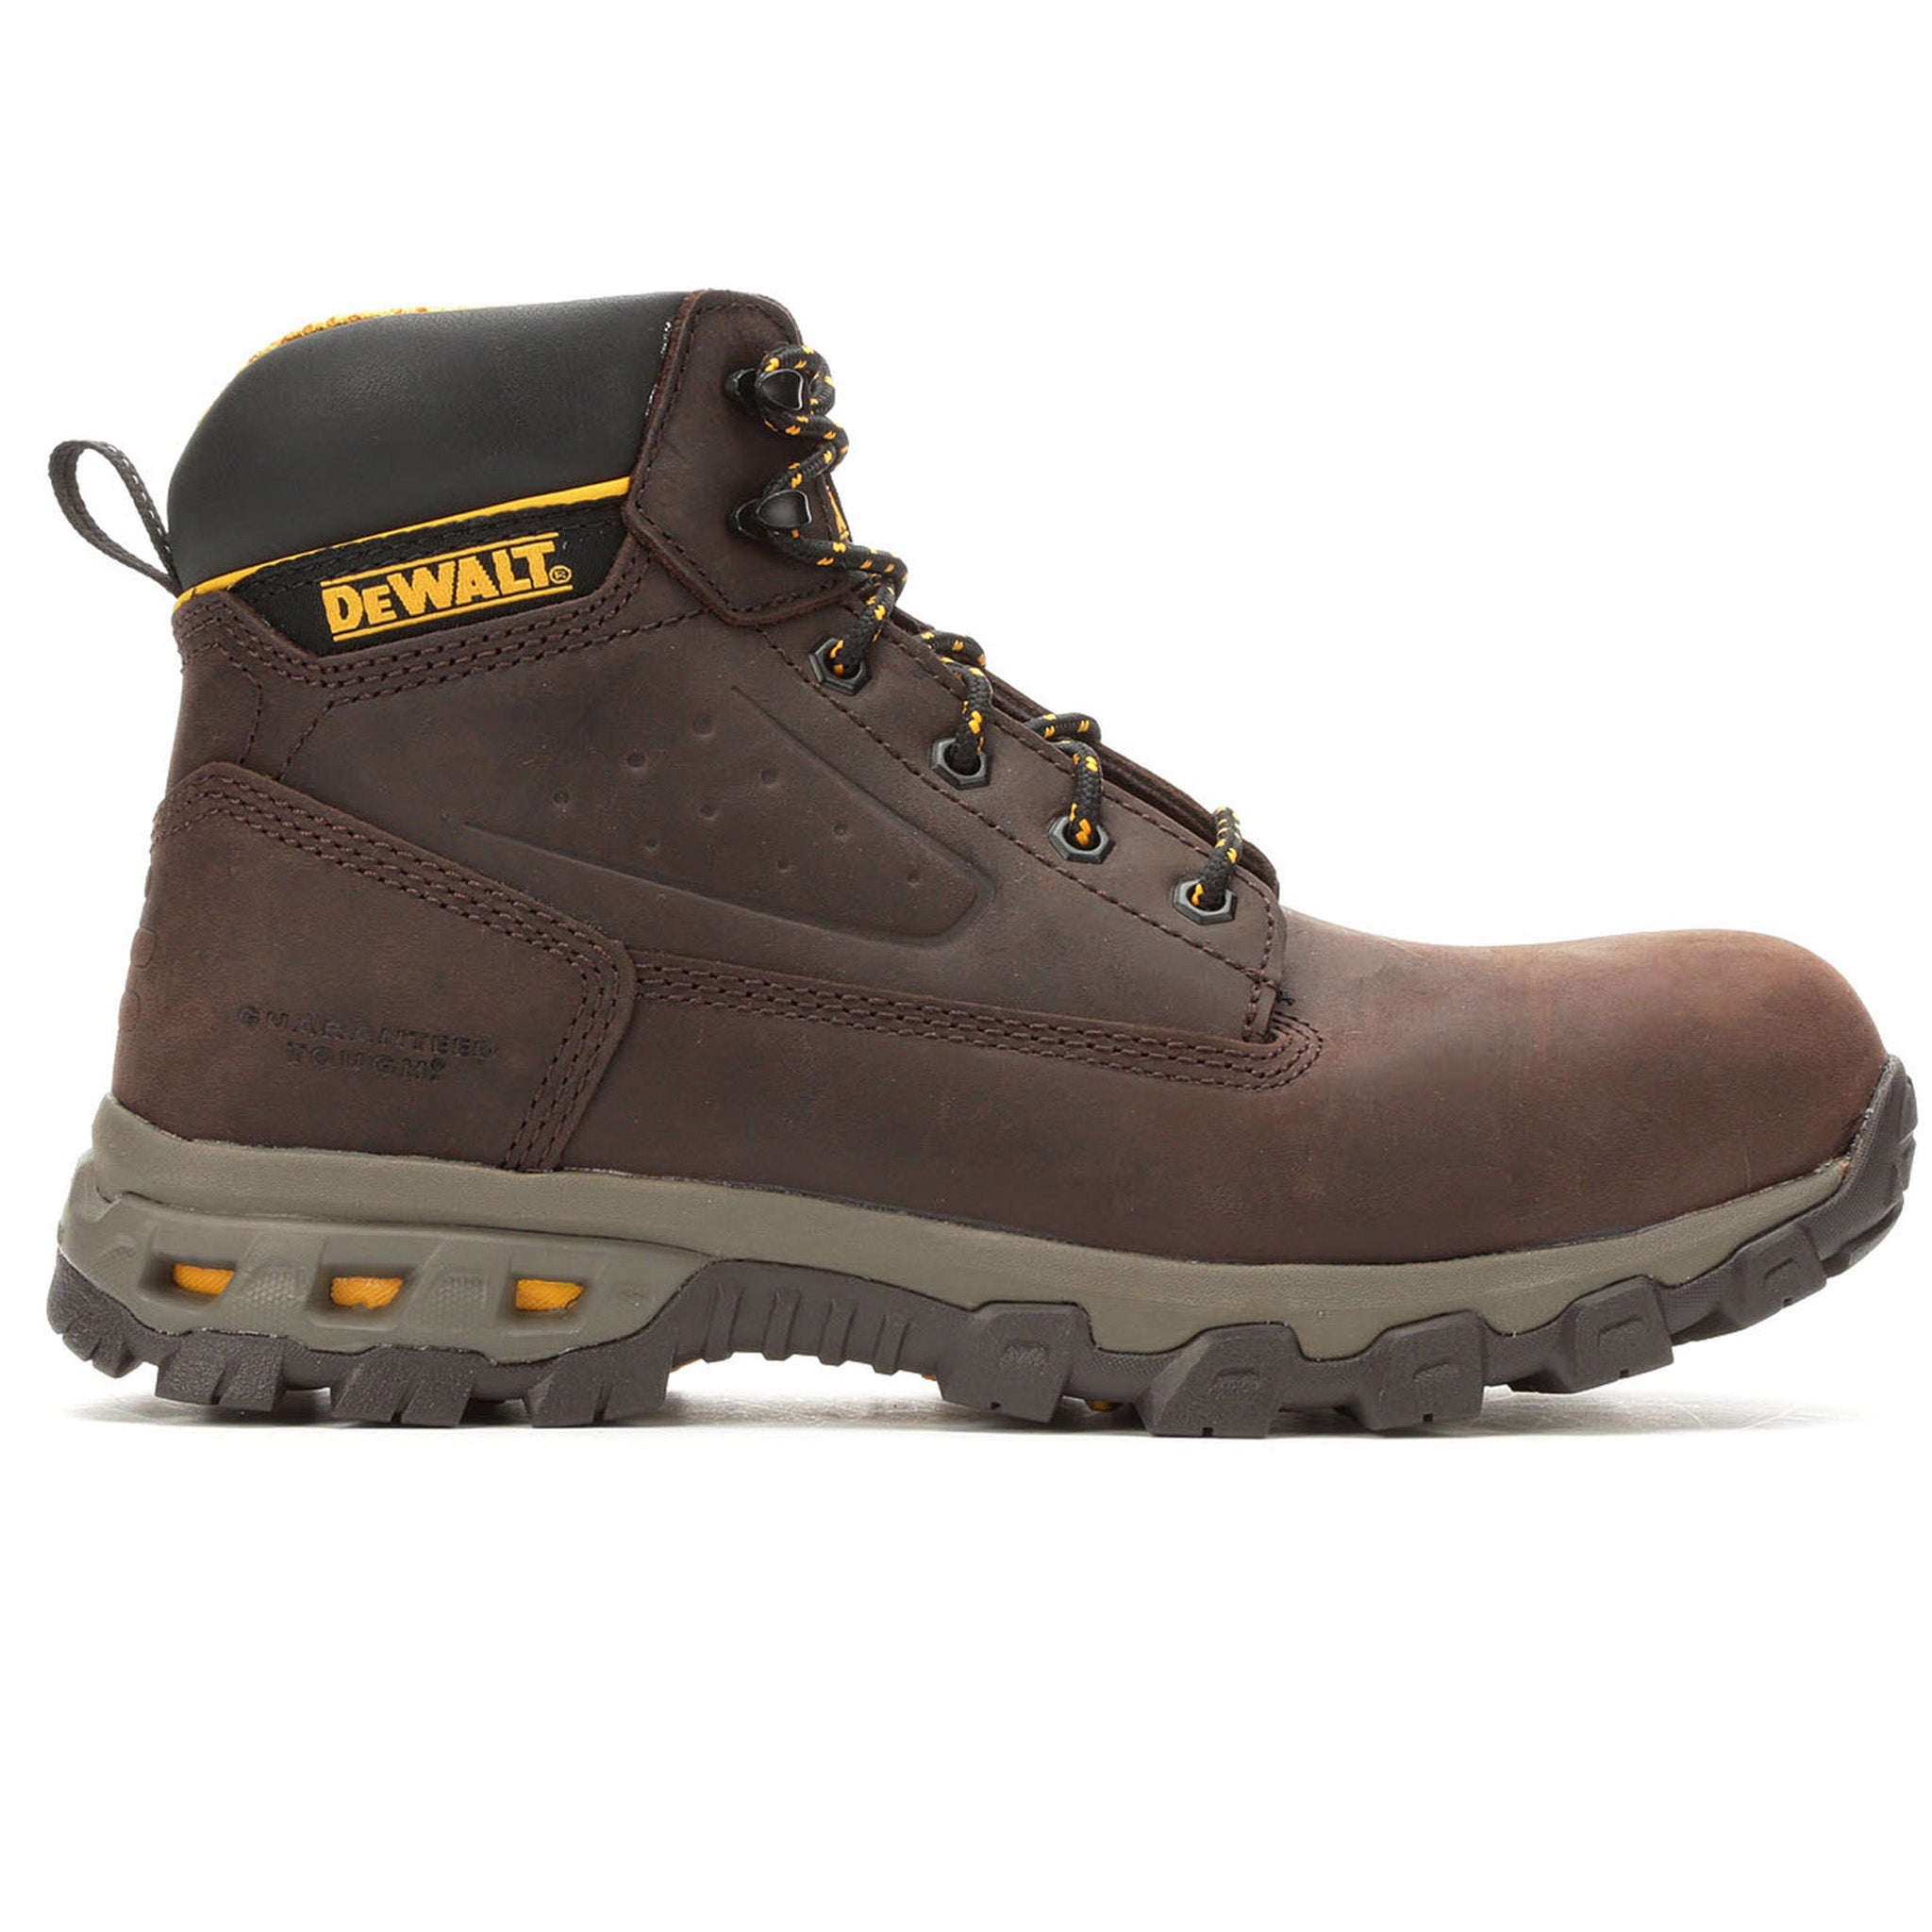 DeWALT Men's DXWP10008 Halogen Leather Toe Work Boots – That and More